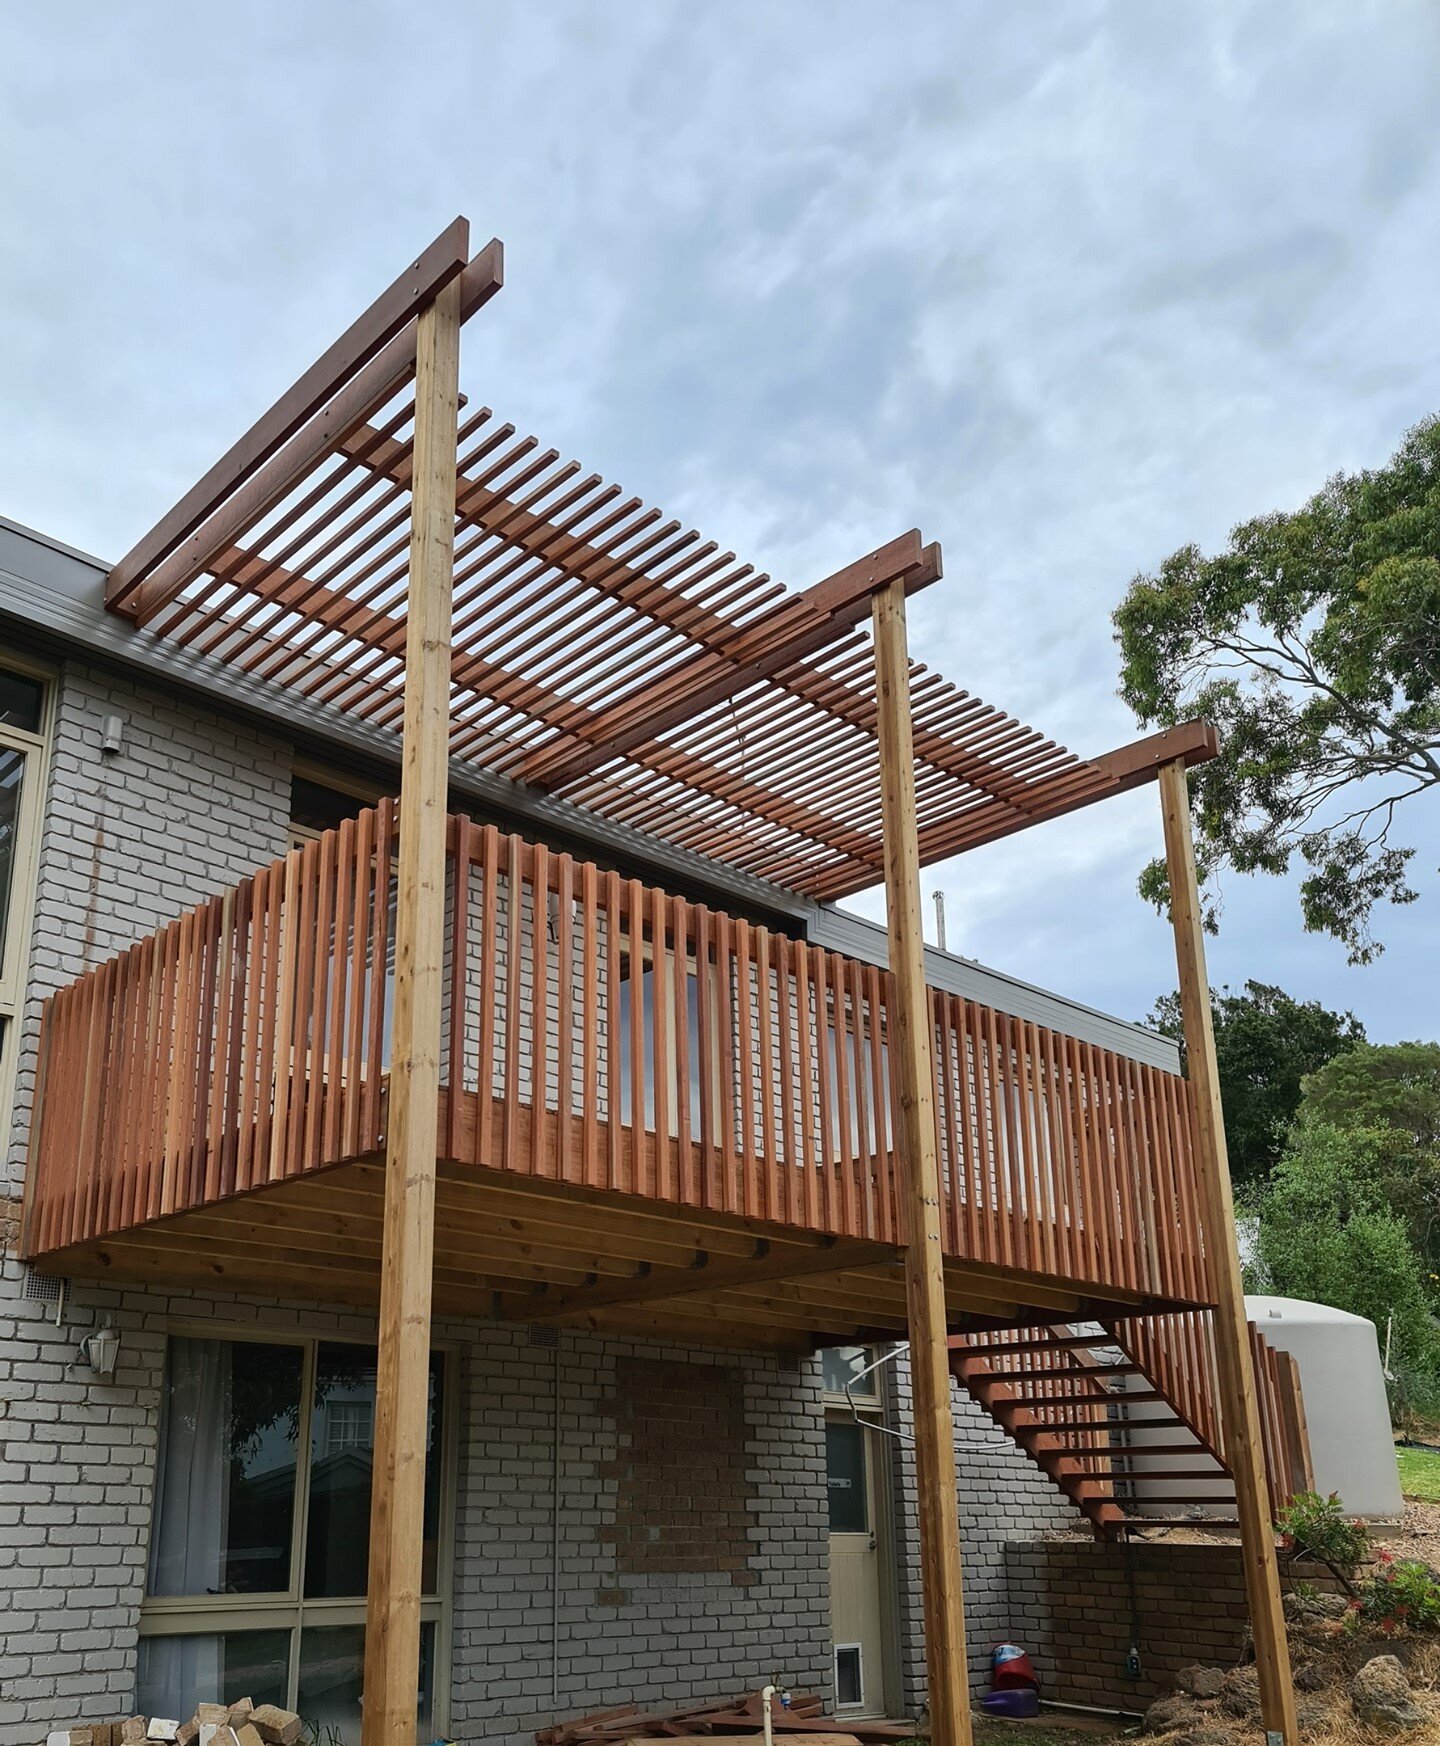 ORCHARD | work in progress. new balcony complete in beautiful Darwin stringybark timber #orchard #jarchitecture 
.
.
.
#melbournearchitecture #melbournearchitect #architectmelbourne #australianarchitecture #architecture #architectureproject #architec